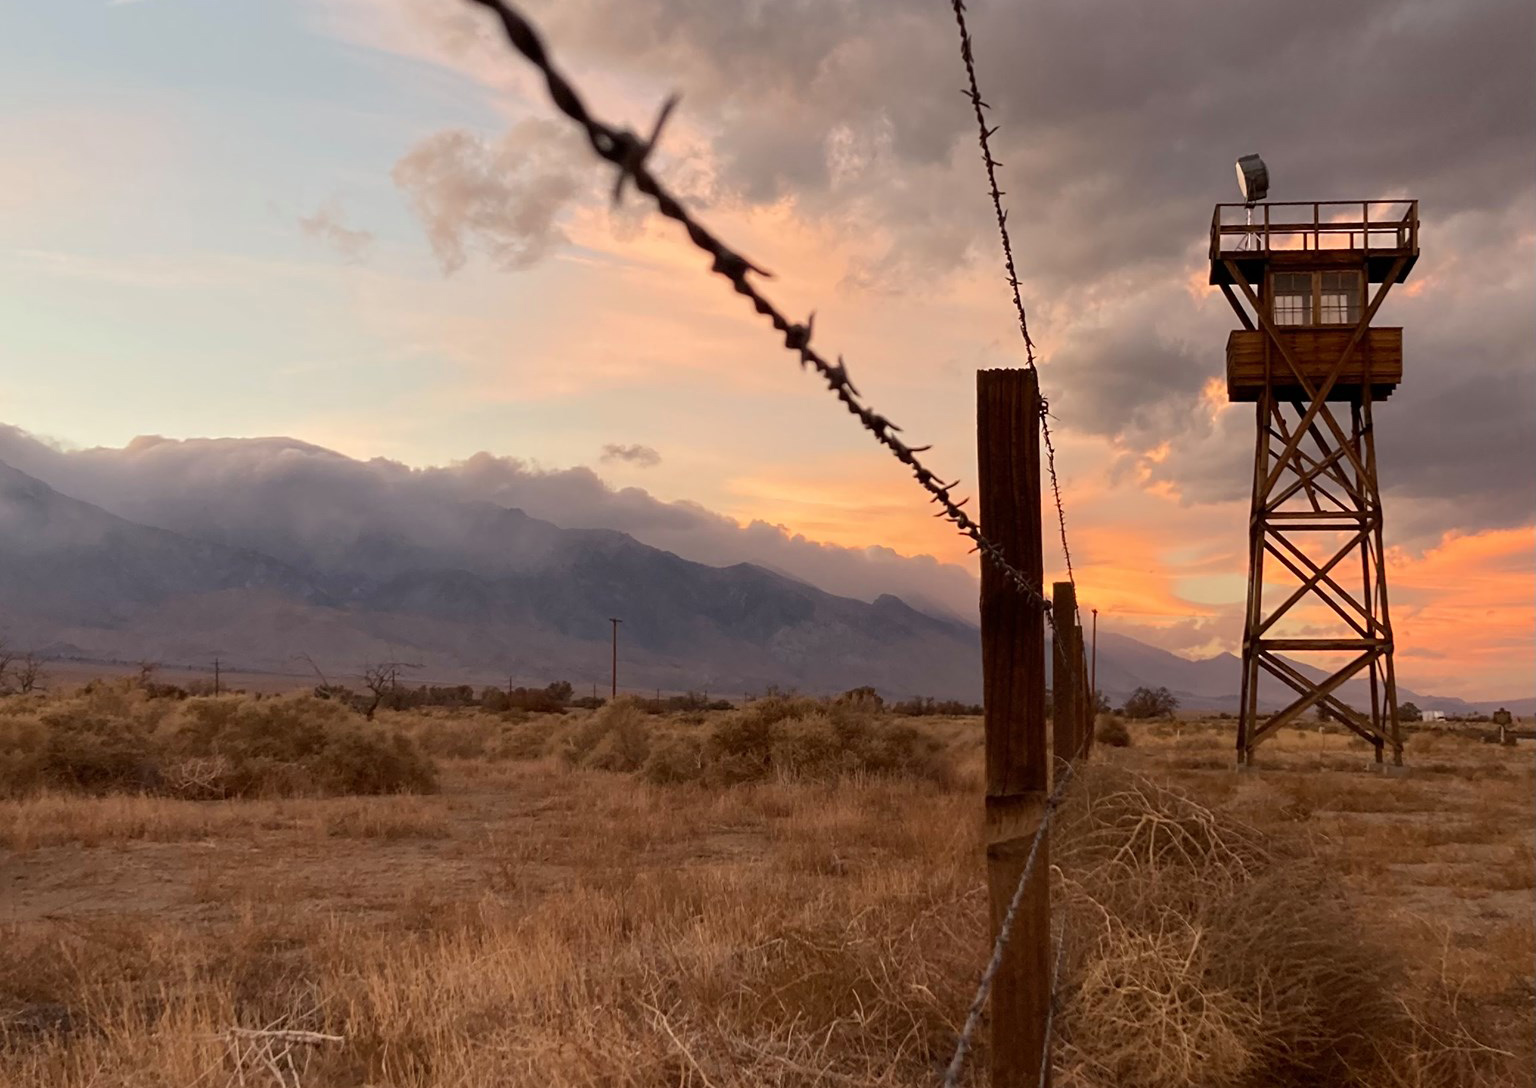 Sunset over guard tower and fence surrounded by mountainous landscape.